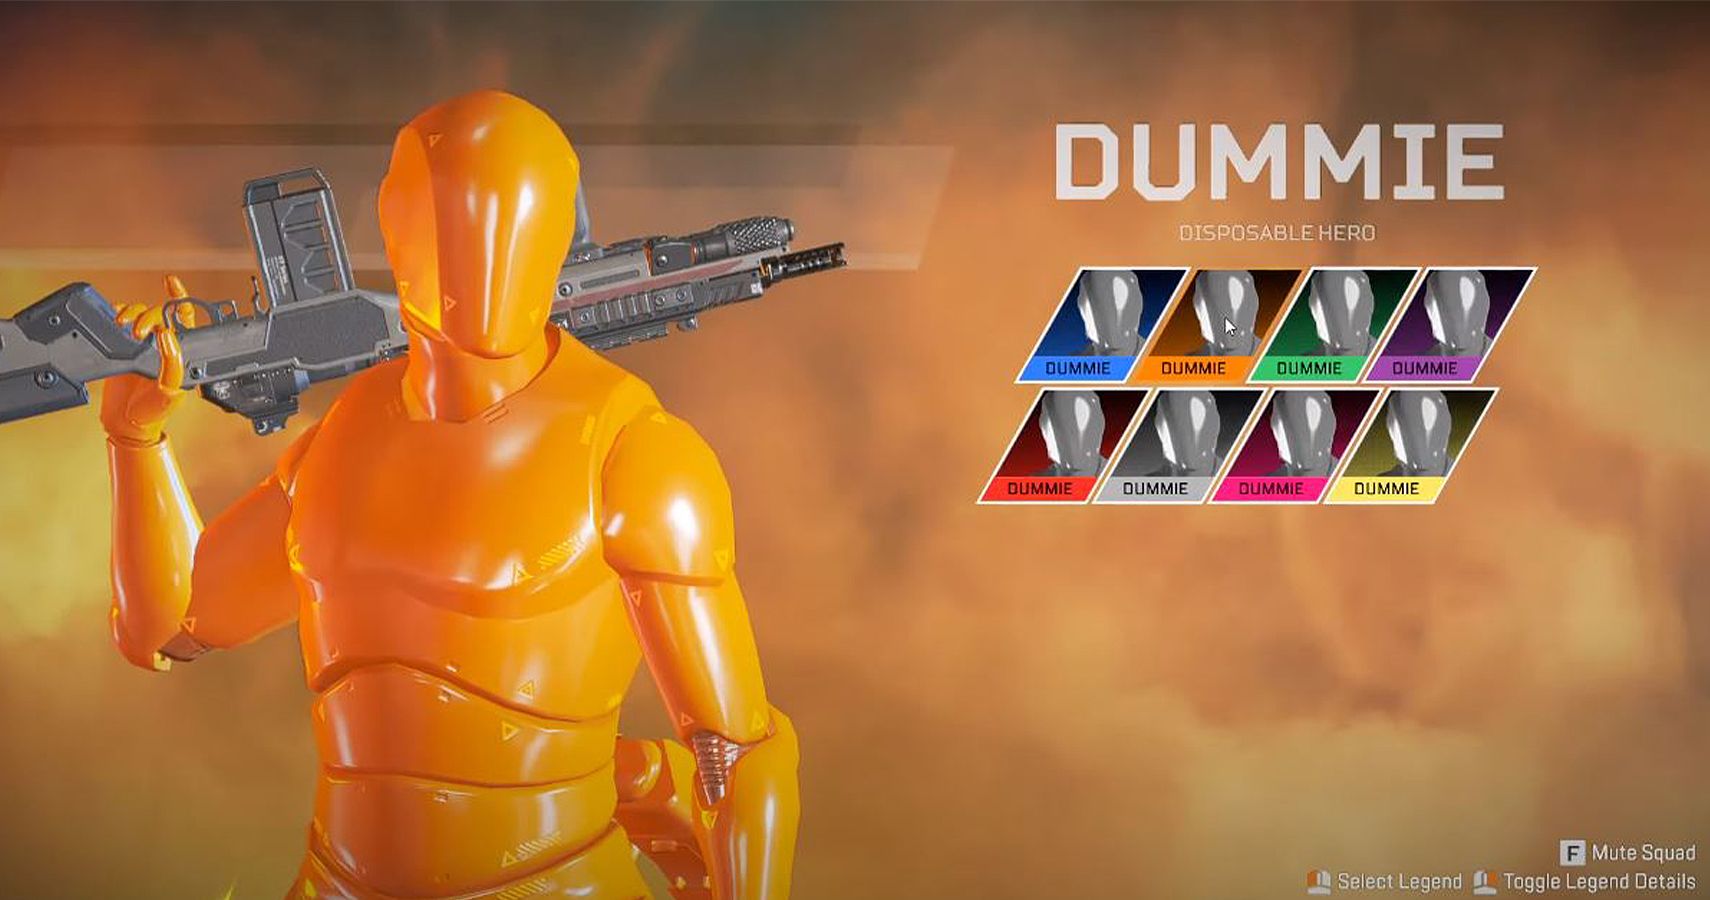 Apex Legends Dummie Mode Character select